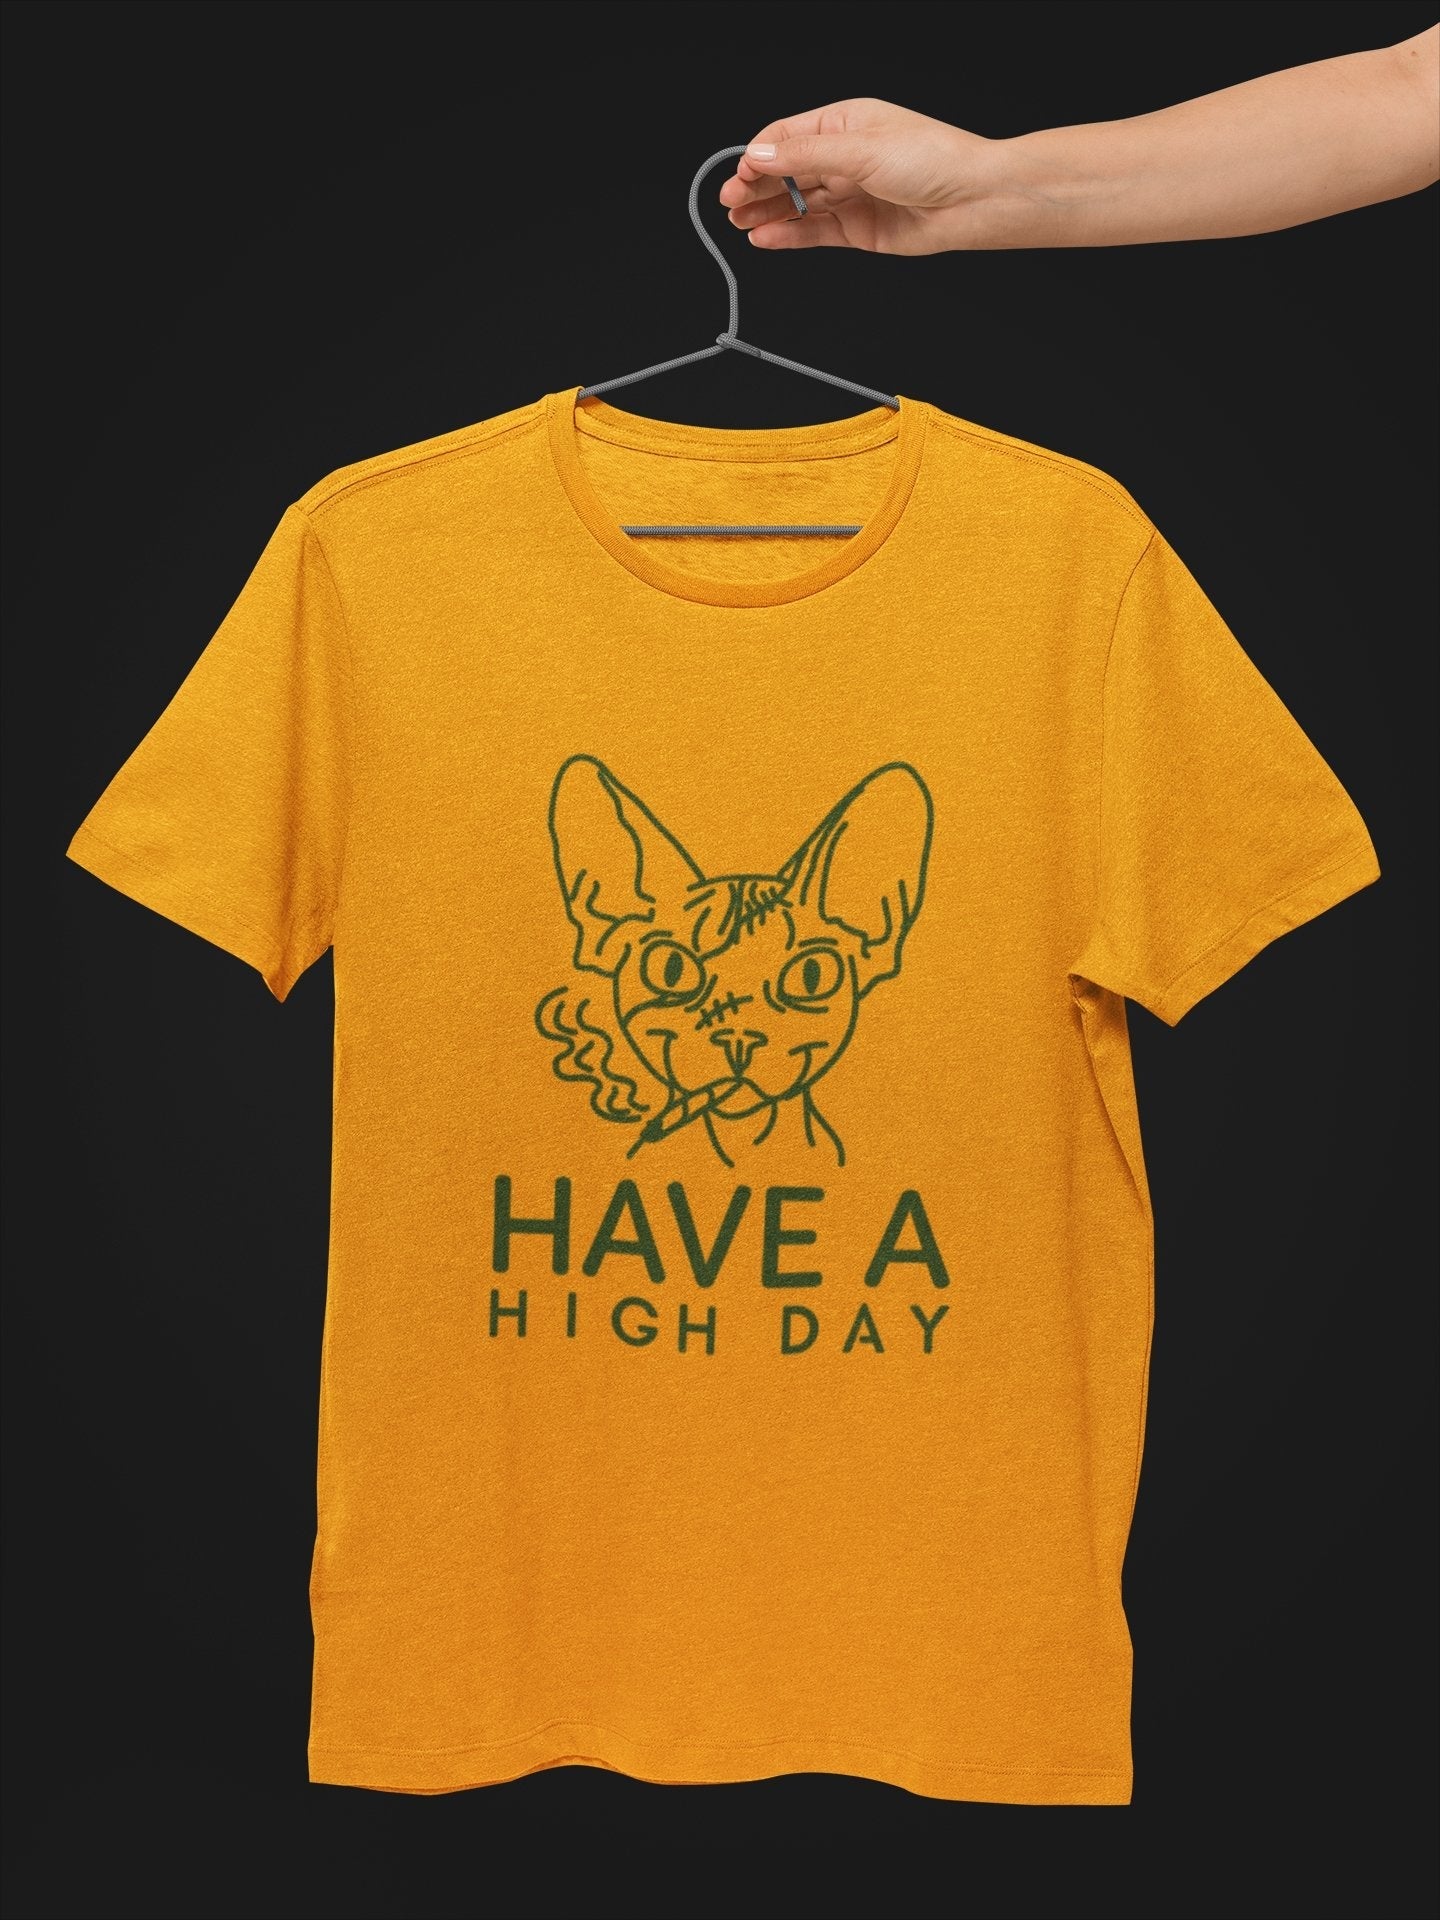 Have a High Day Stoner T shirt - Insane Tees